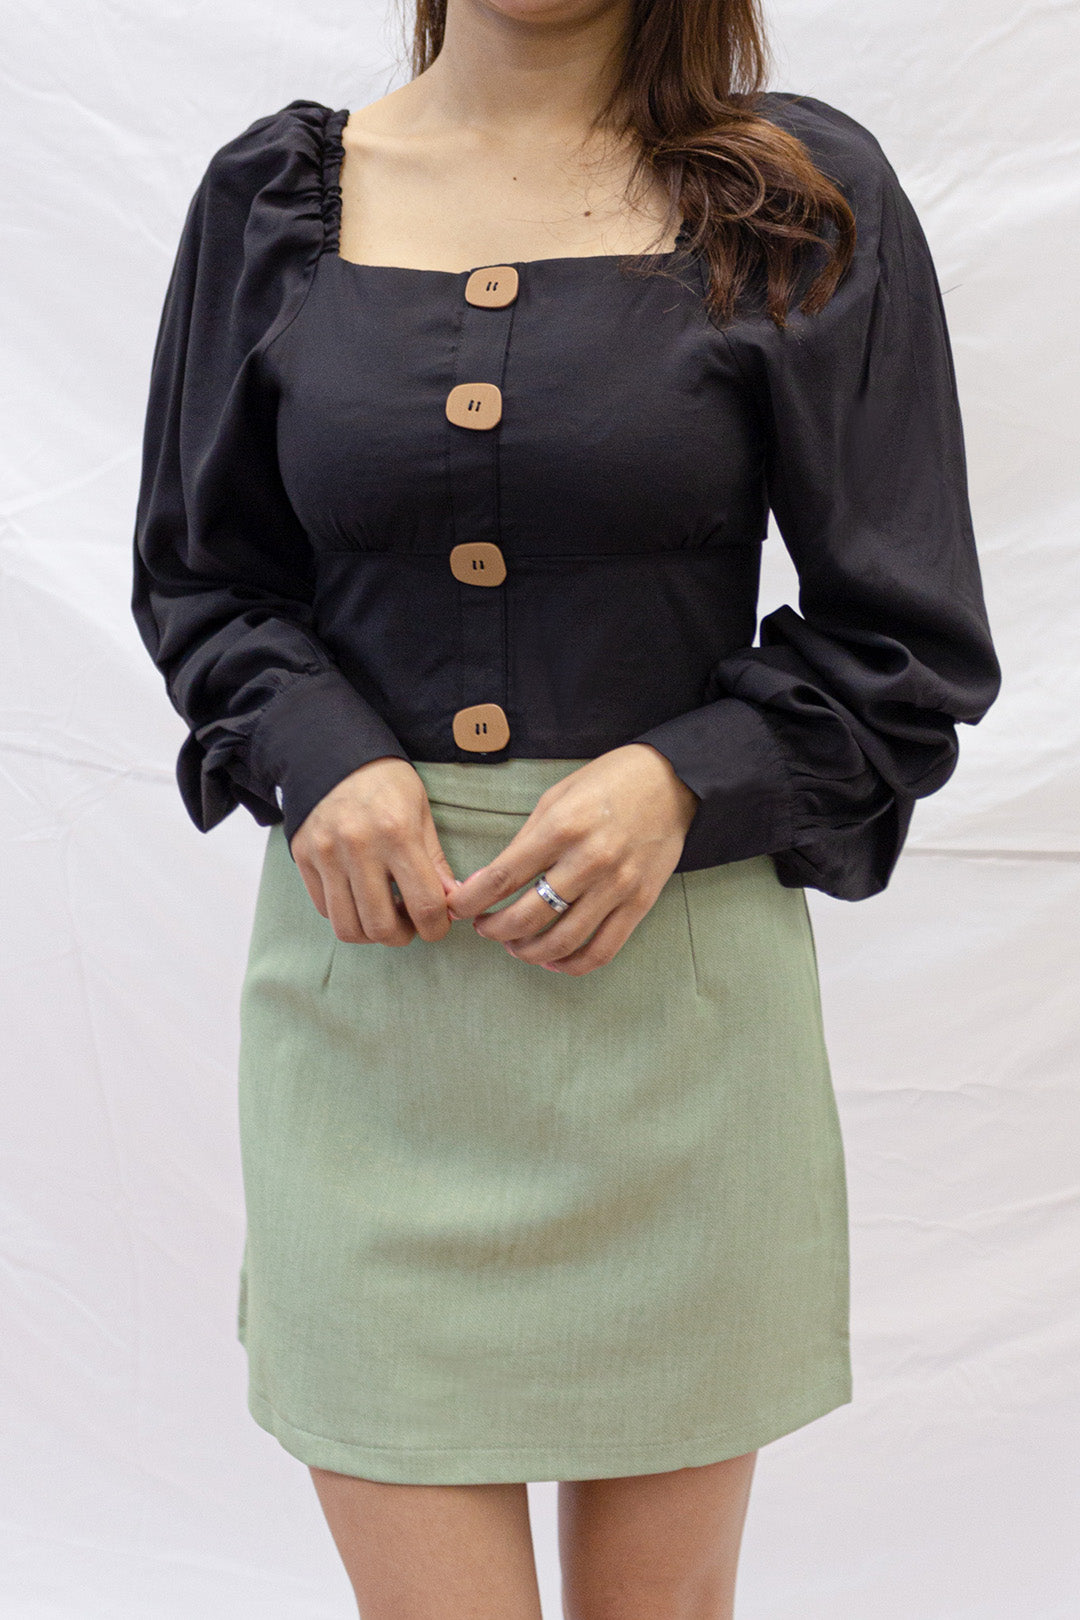 Fitted lined skirt, perfect for workwear